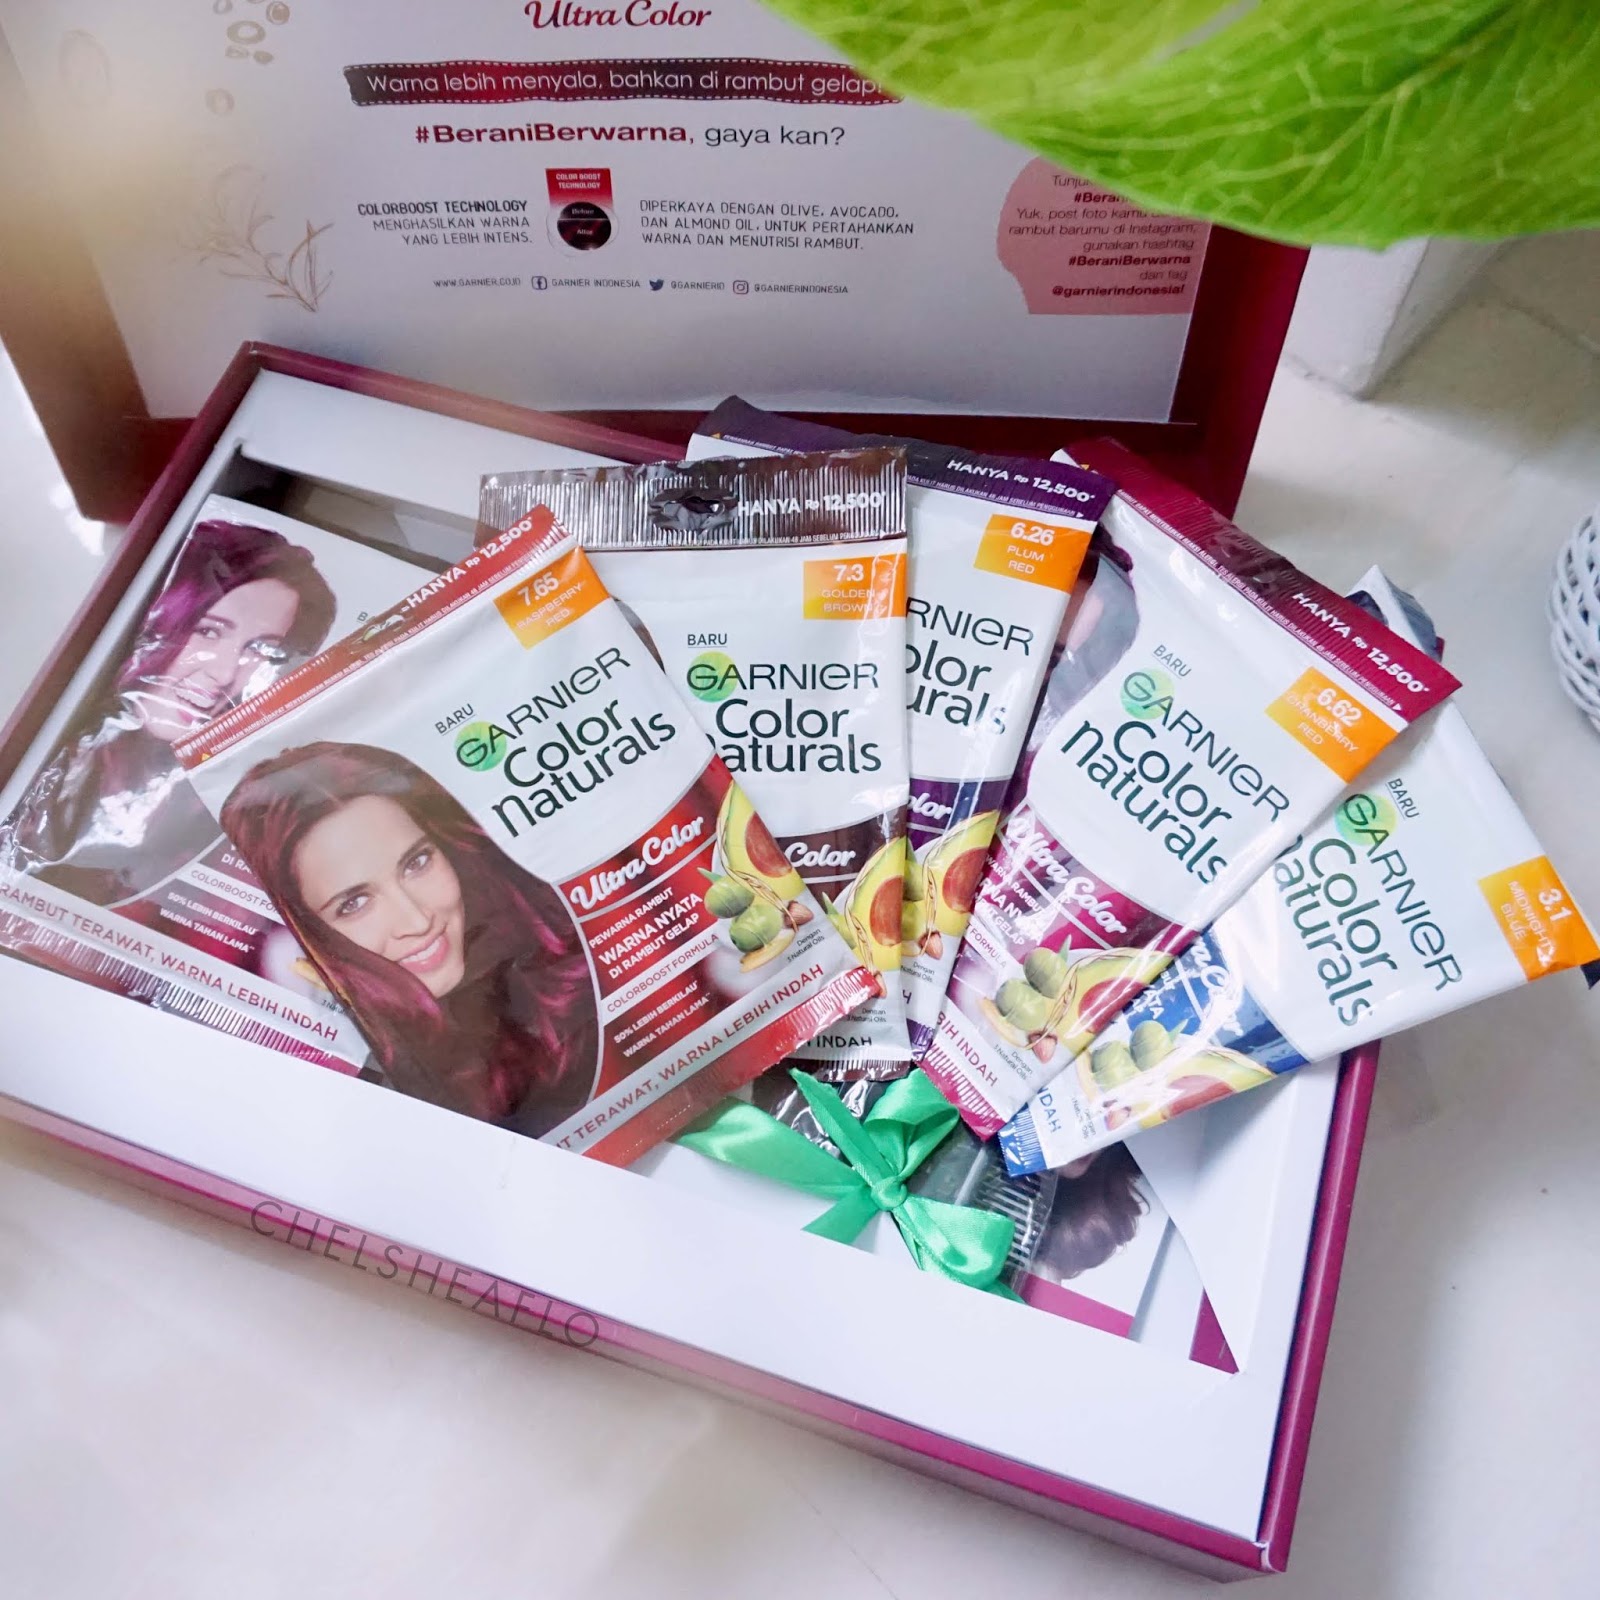 REVIEW] DIY Hair Coloring With Garnier Color Naturals Ultra Color : Golden  Brown - CHELSHEAFLO